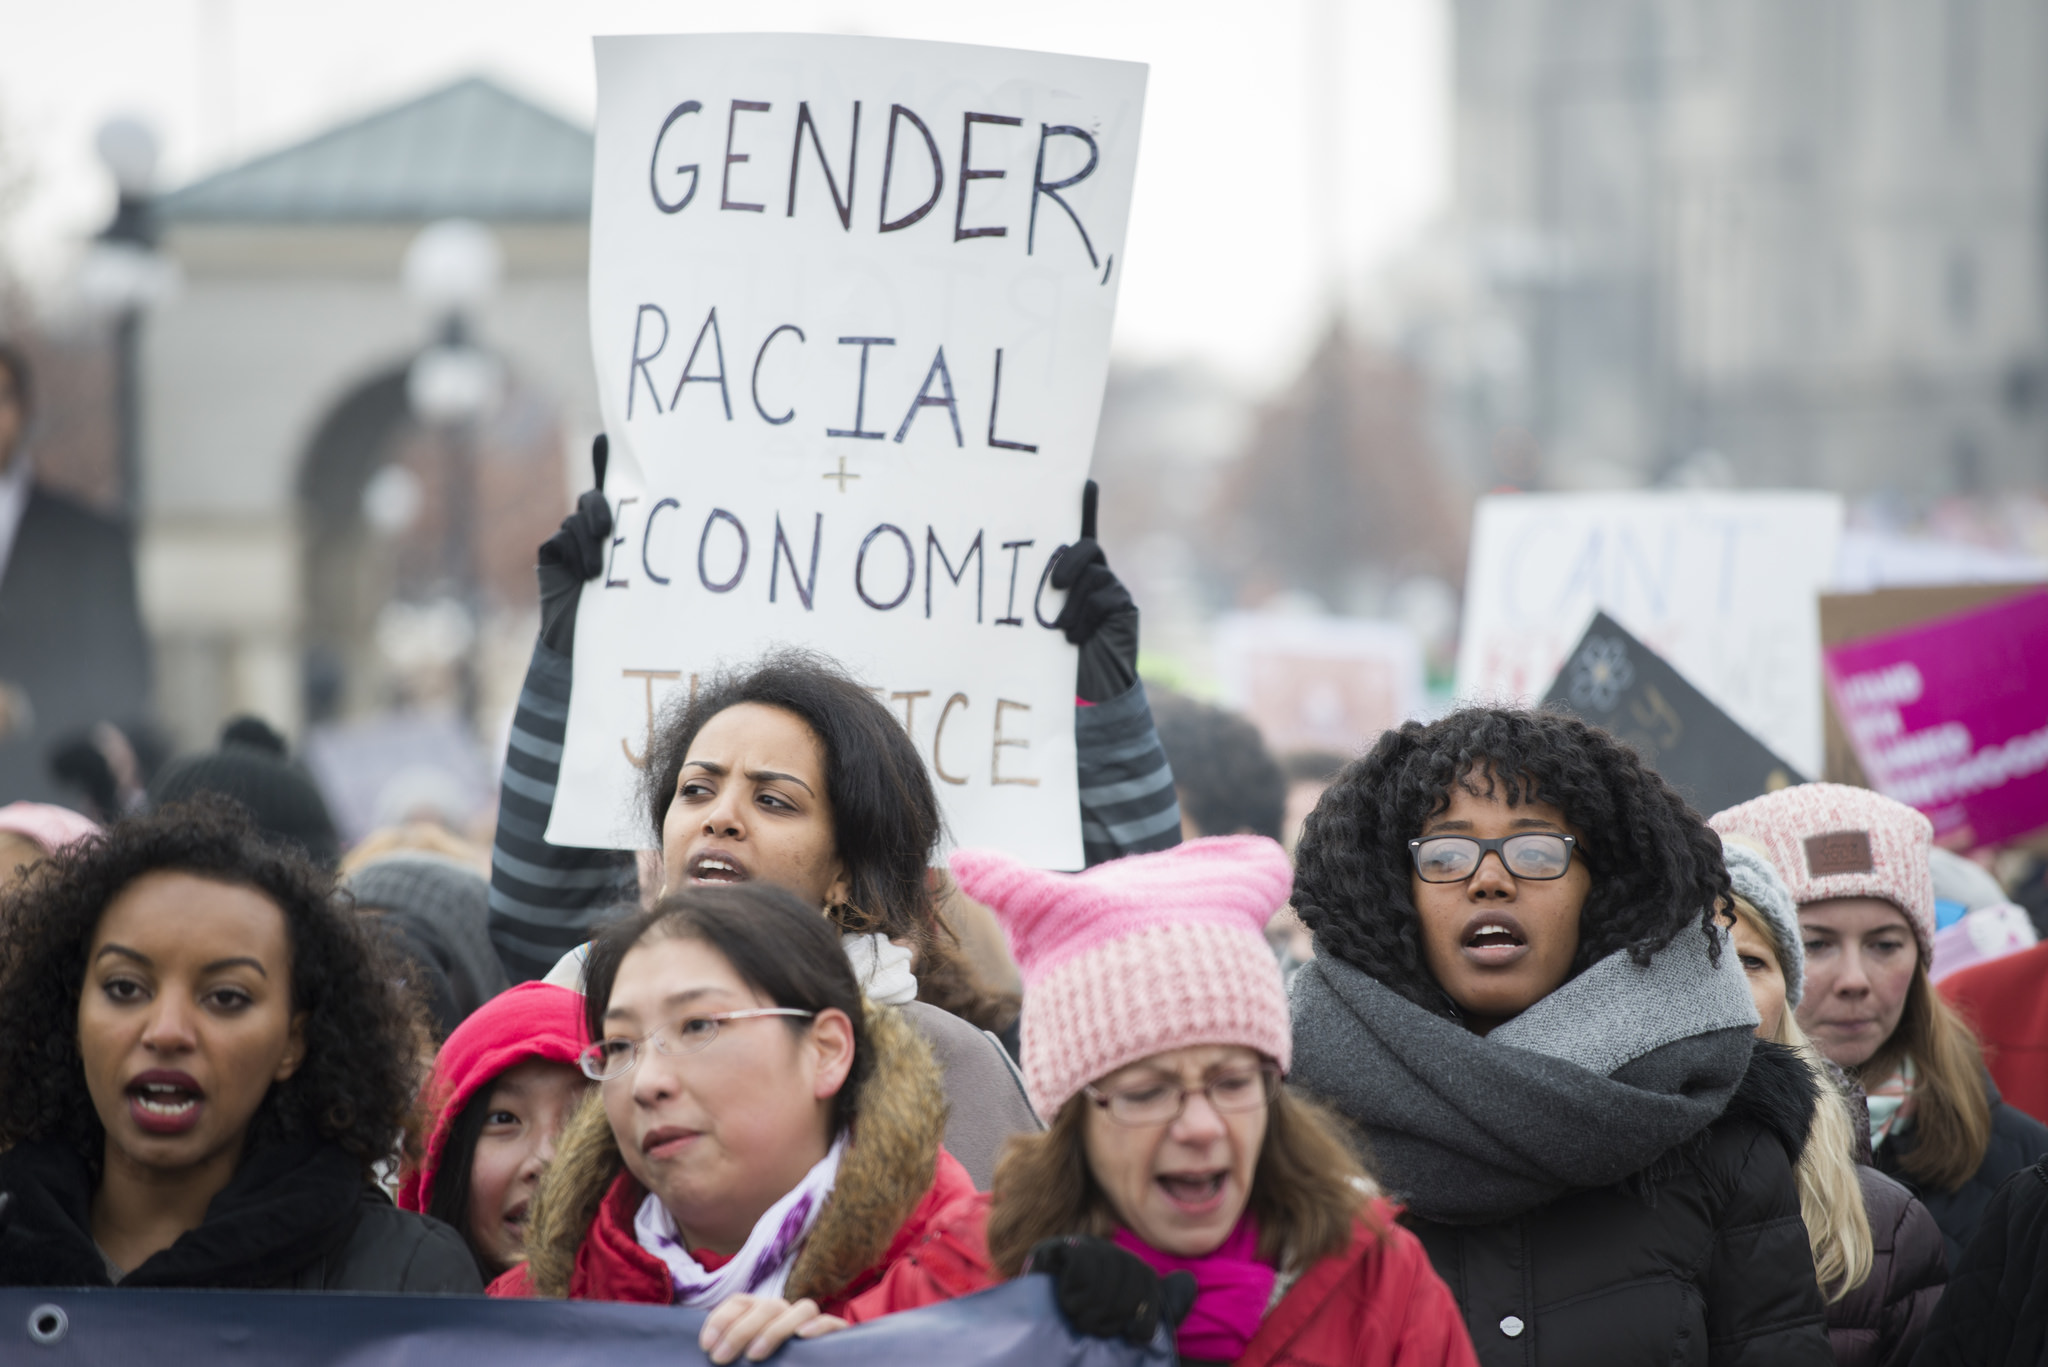 an image featuring a small group of protesters at a Women's March. The group is racially diverse and wearing warm winter clothes. Some of them wear pink pussy hats. One protester holds a sign that states Gender, Racial, Economic Justice